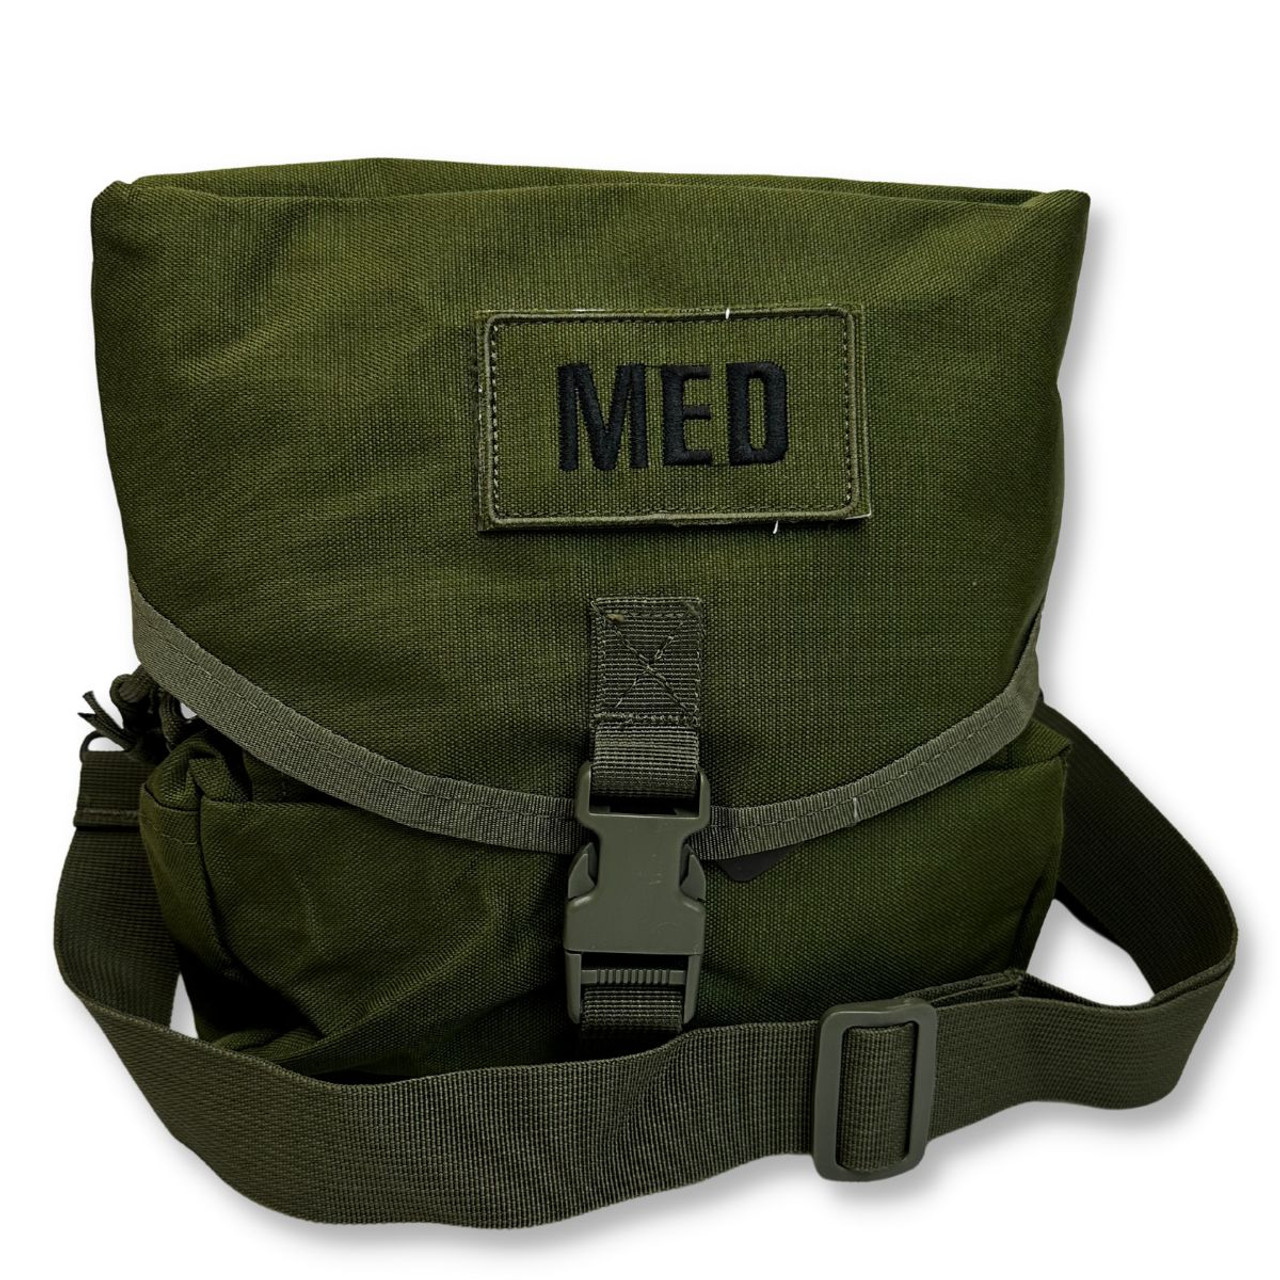 Military General Purpose M3 First Aid kit